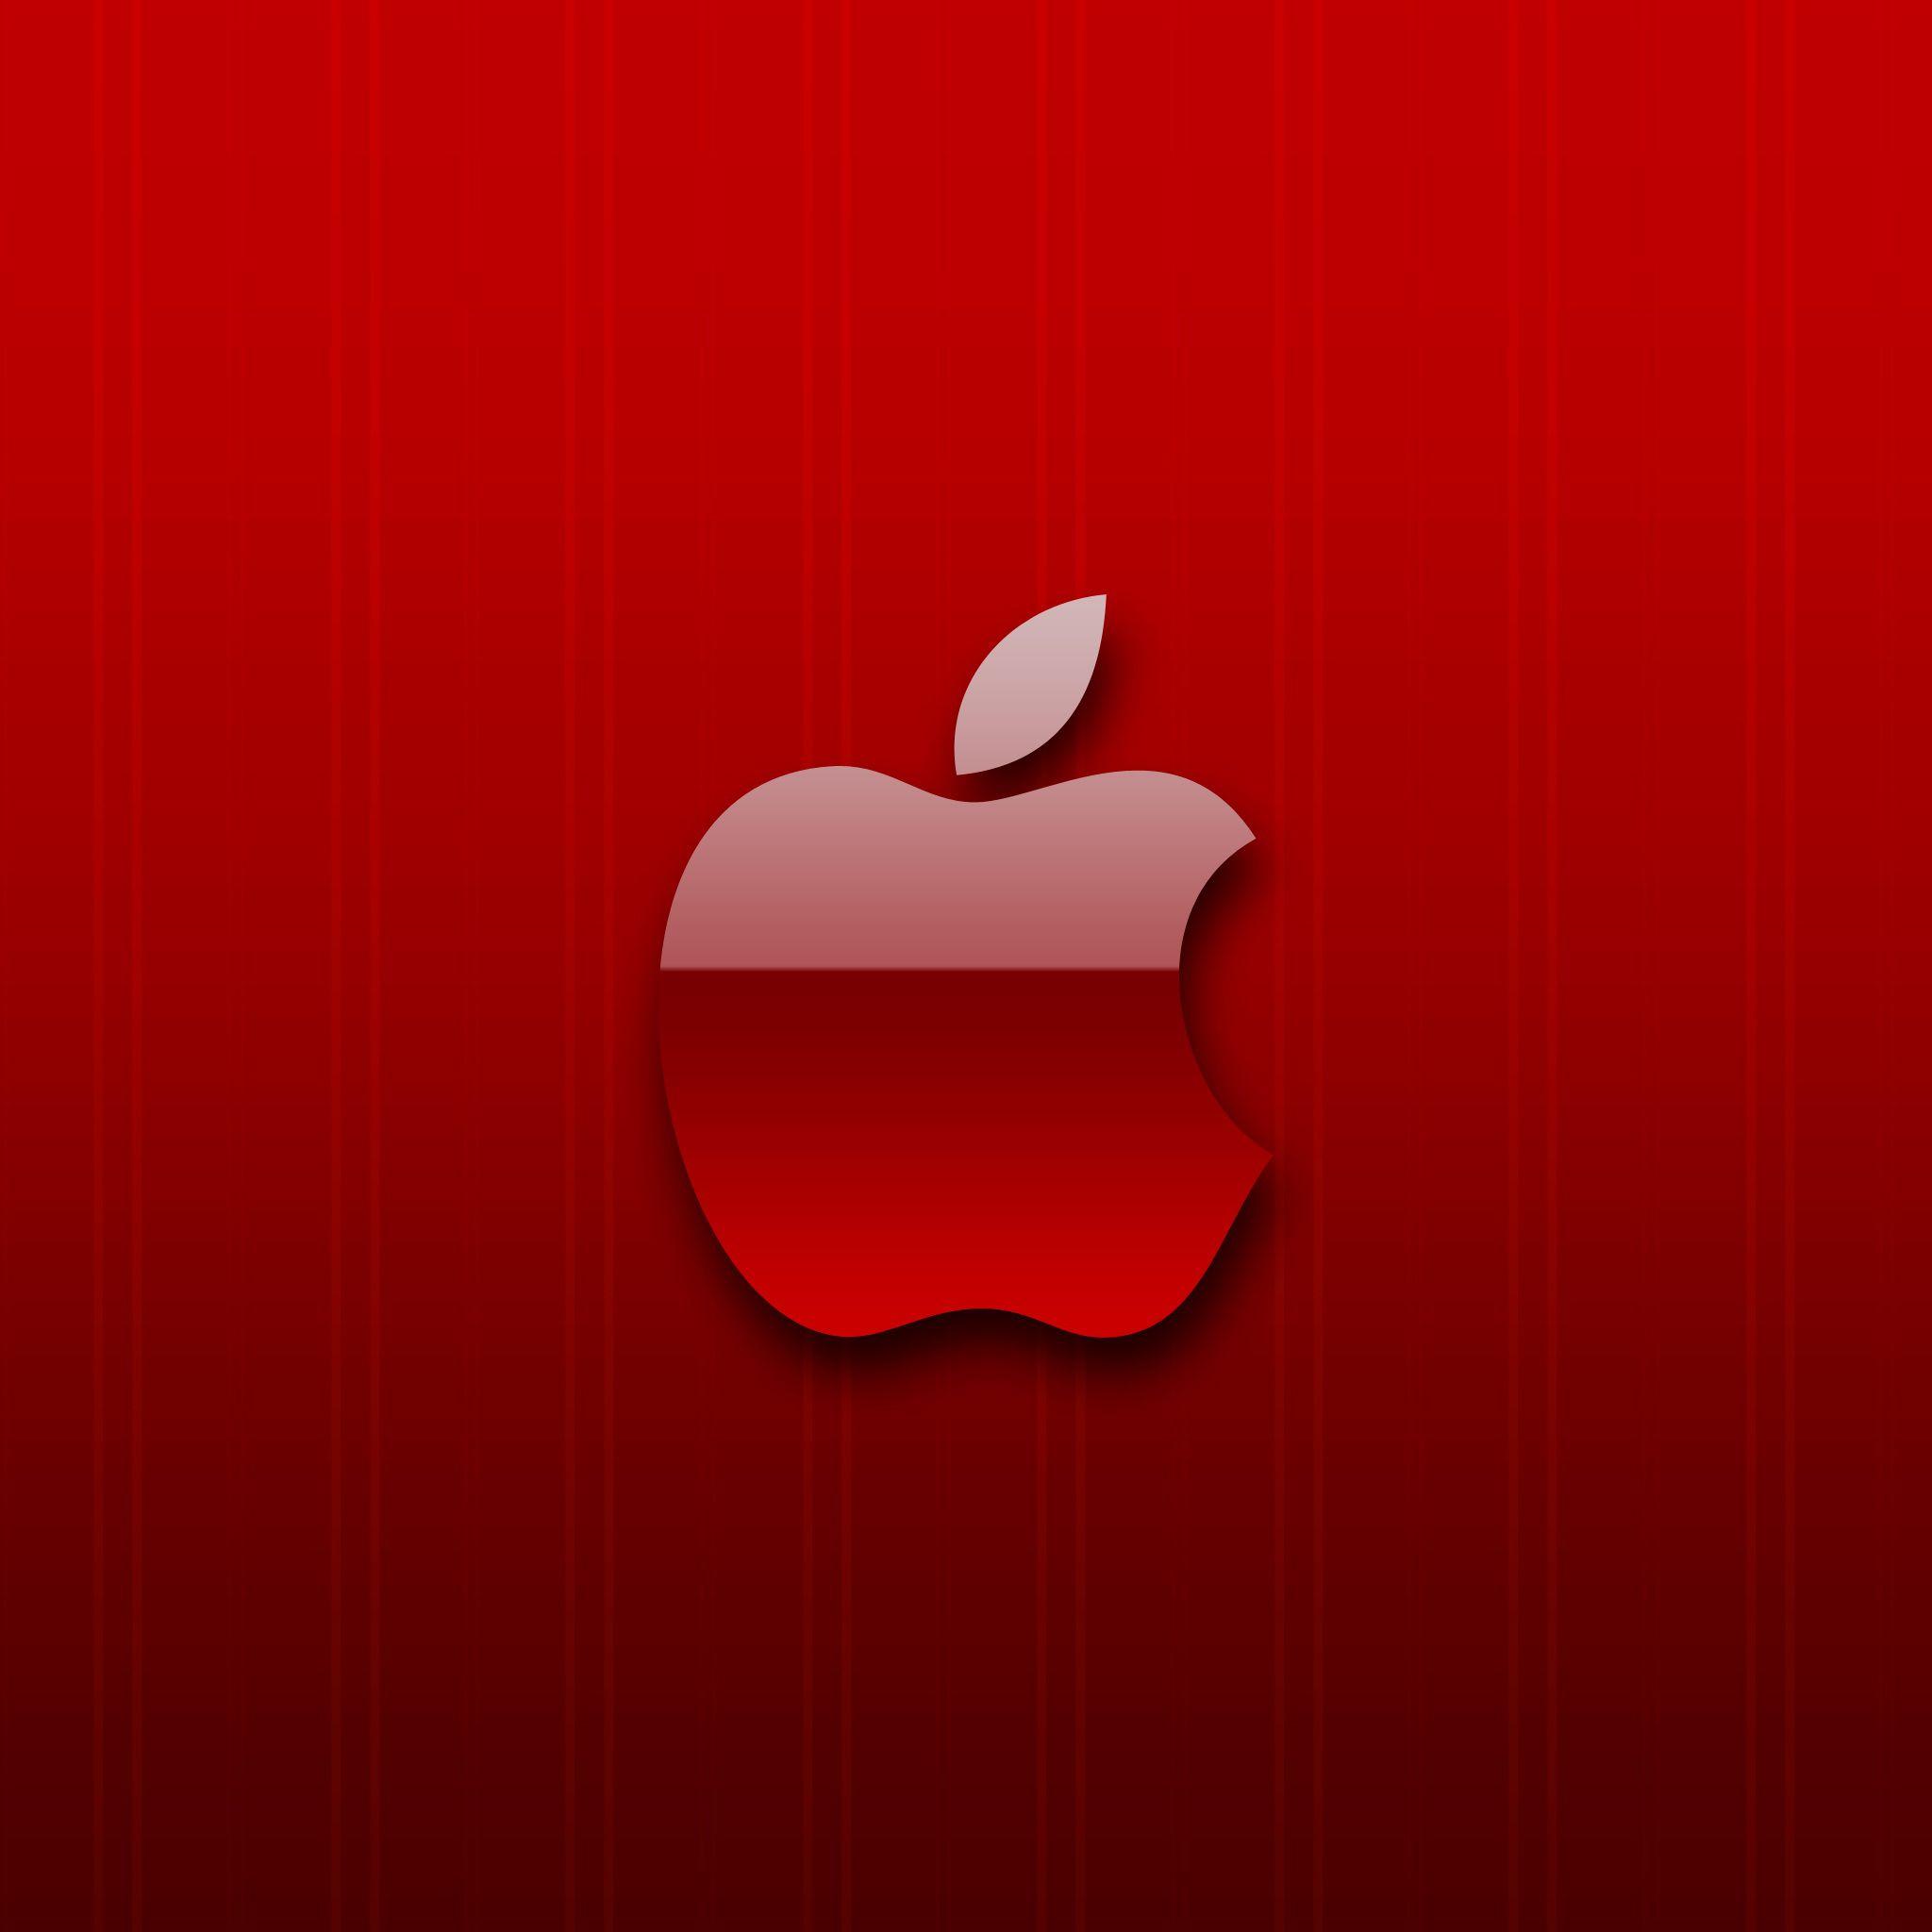 Apple iPhone Skull Wallpaper image. Apples in Pink and Red